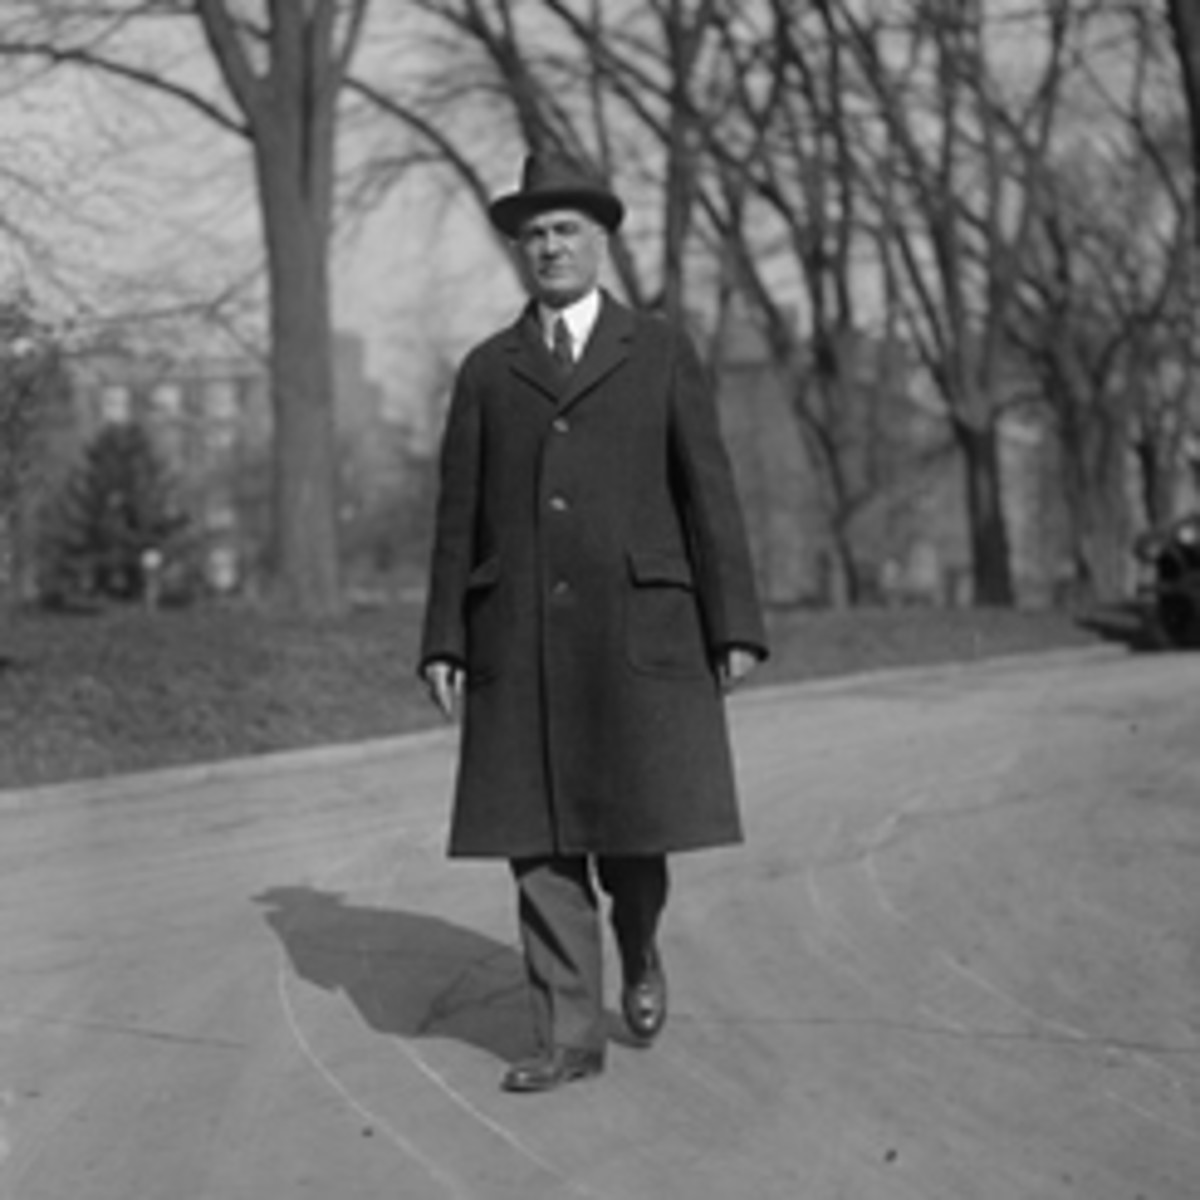 mage courtesy of Library of Congress Elected to 11 terms in the House of Representatives, John Q. Tilson of Connecticut served as the Republican Majority Leader from 1925 to 1931.